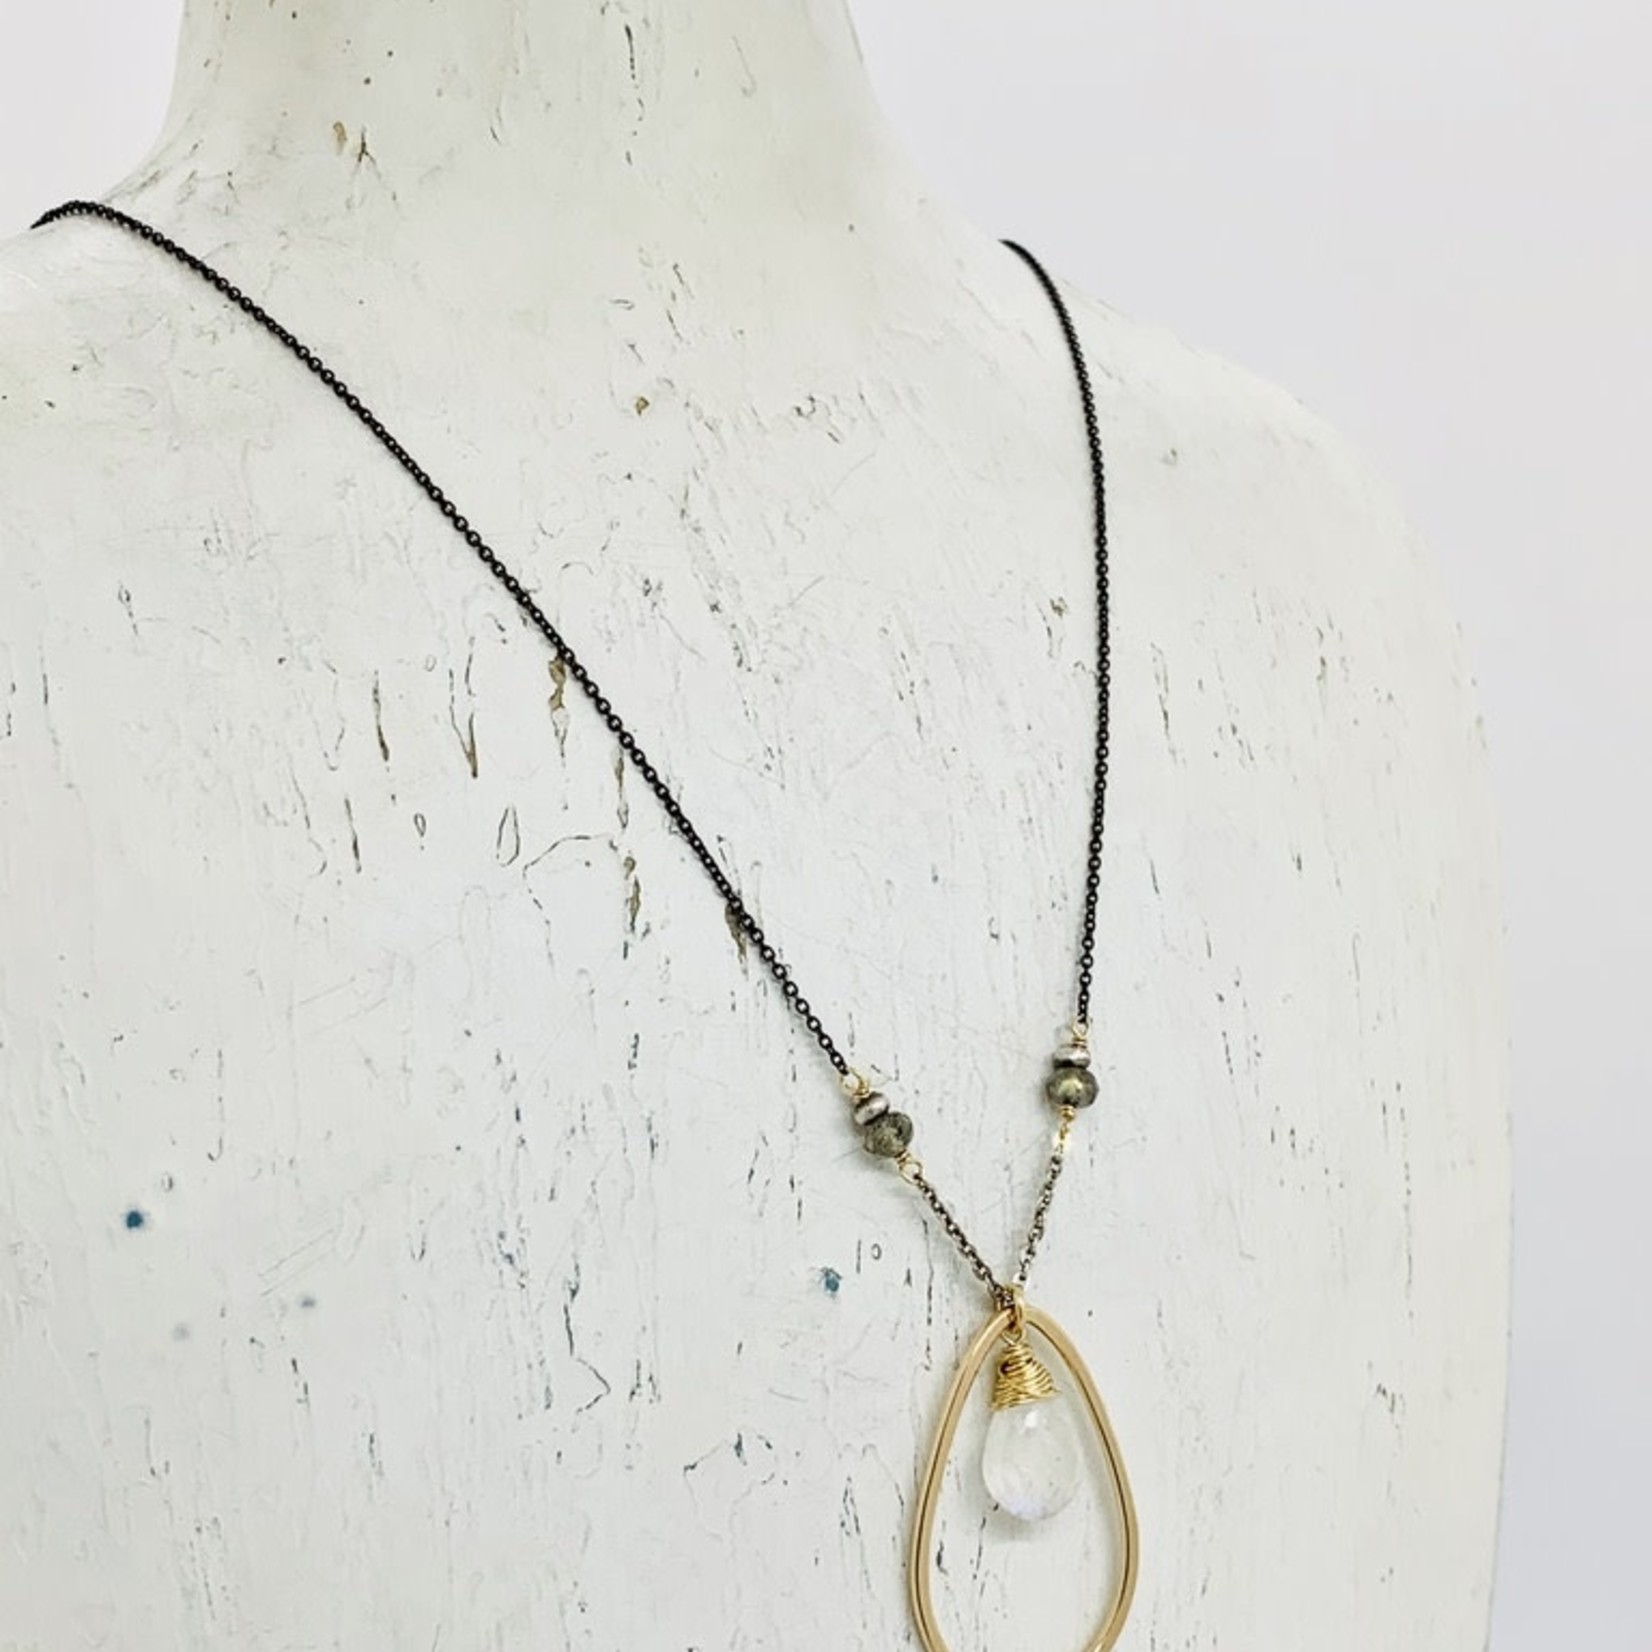 J&I Handmade Necklace with 12mm Faceted Moonstone in 14kt Gold Fill Teardrop on Oxidized Sterling Chain